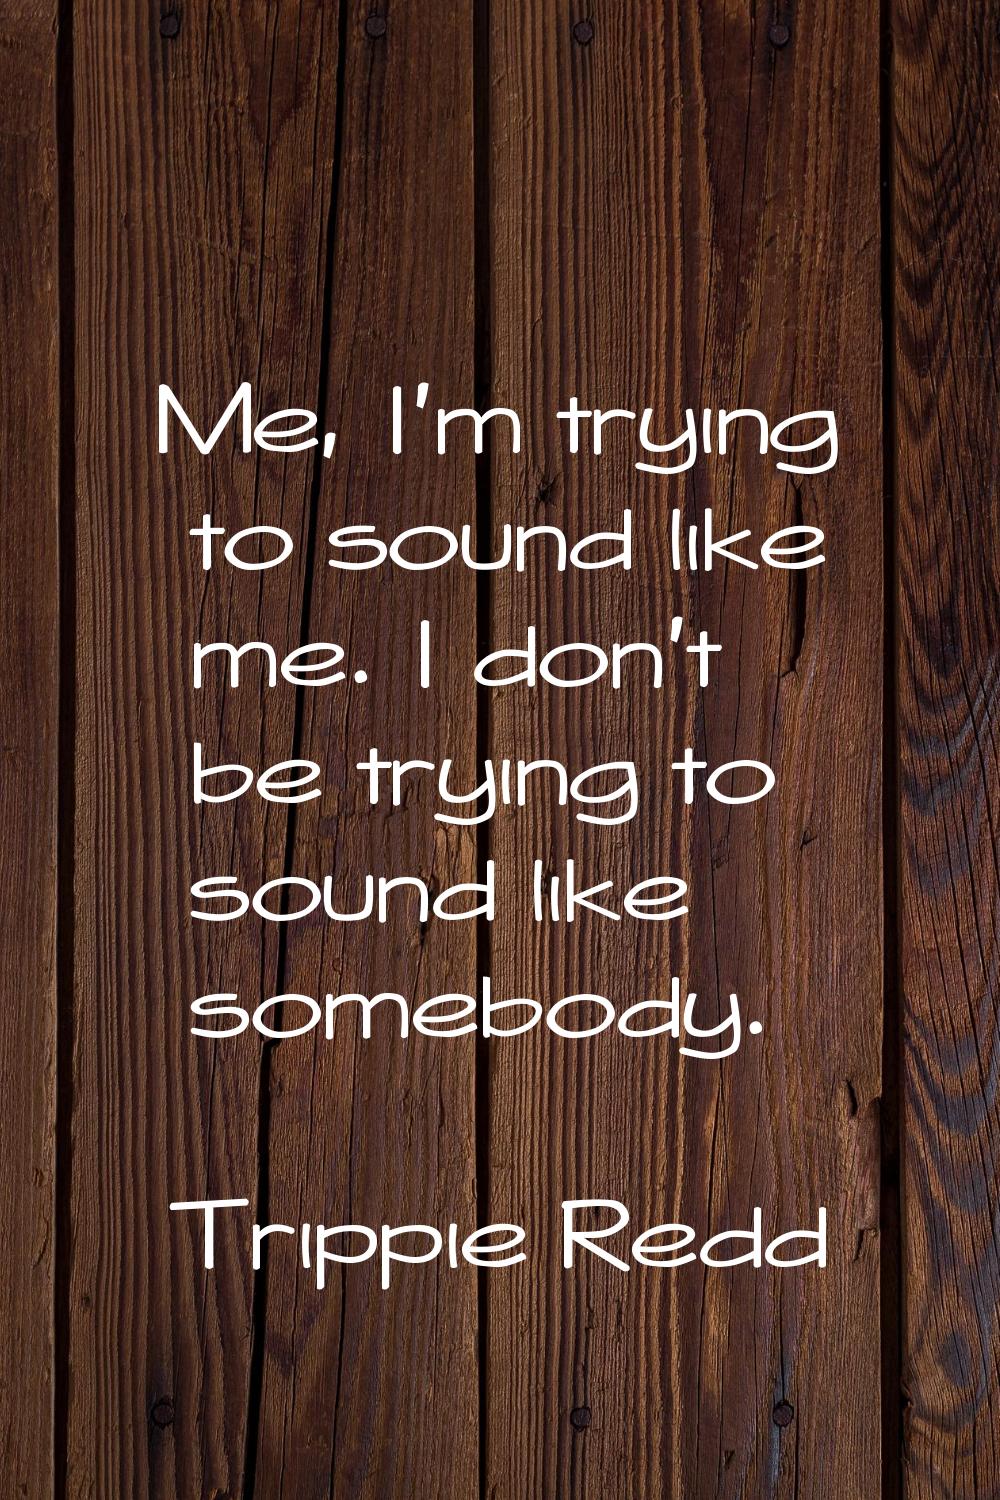 Me, I'm trying to sound like me. I don't be trying to sound like somebody.